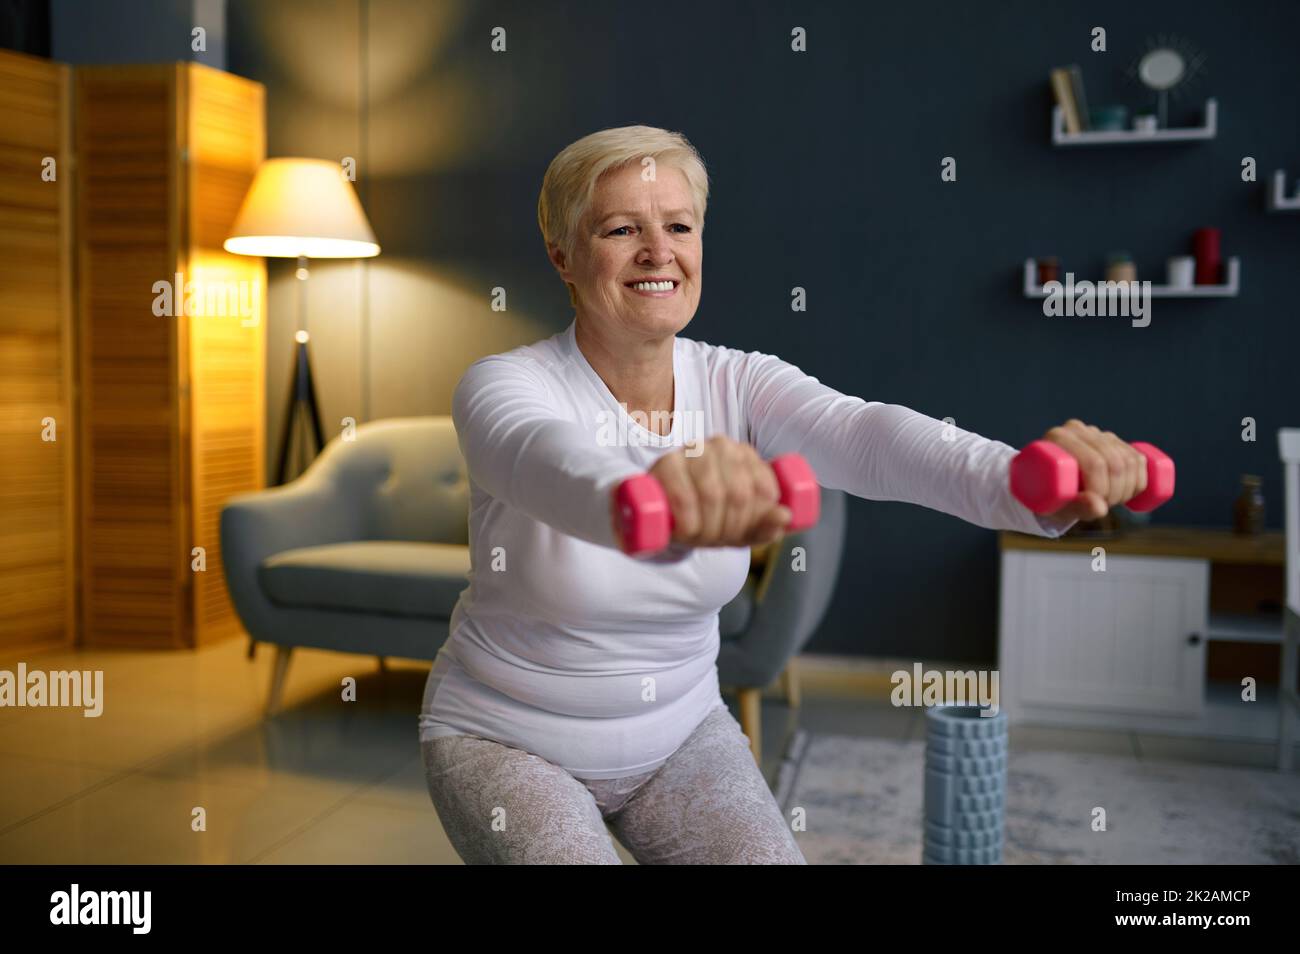 Senior woman training with dumbbells at home Stock Photo